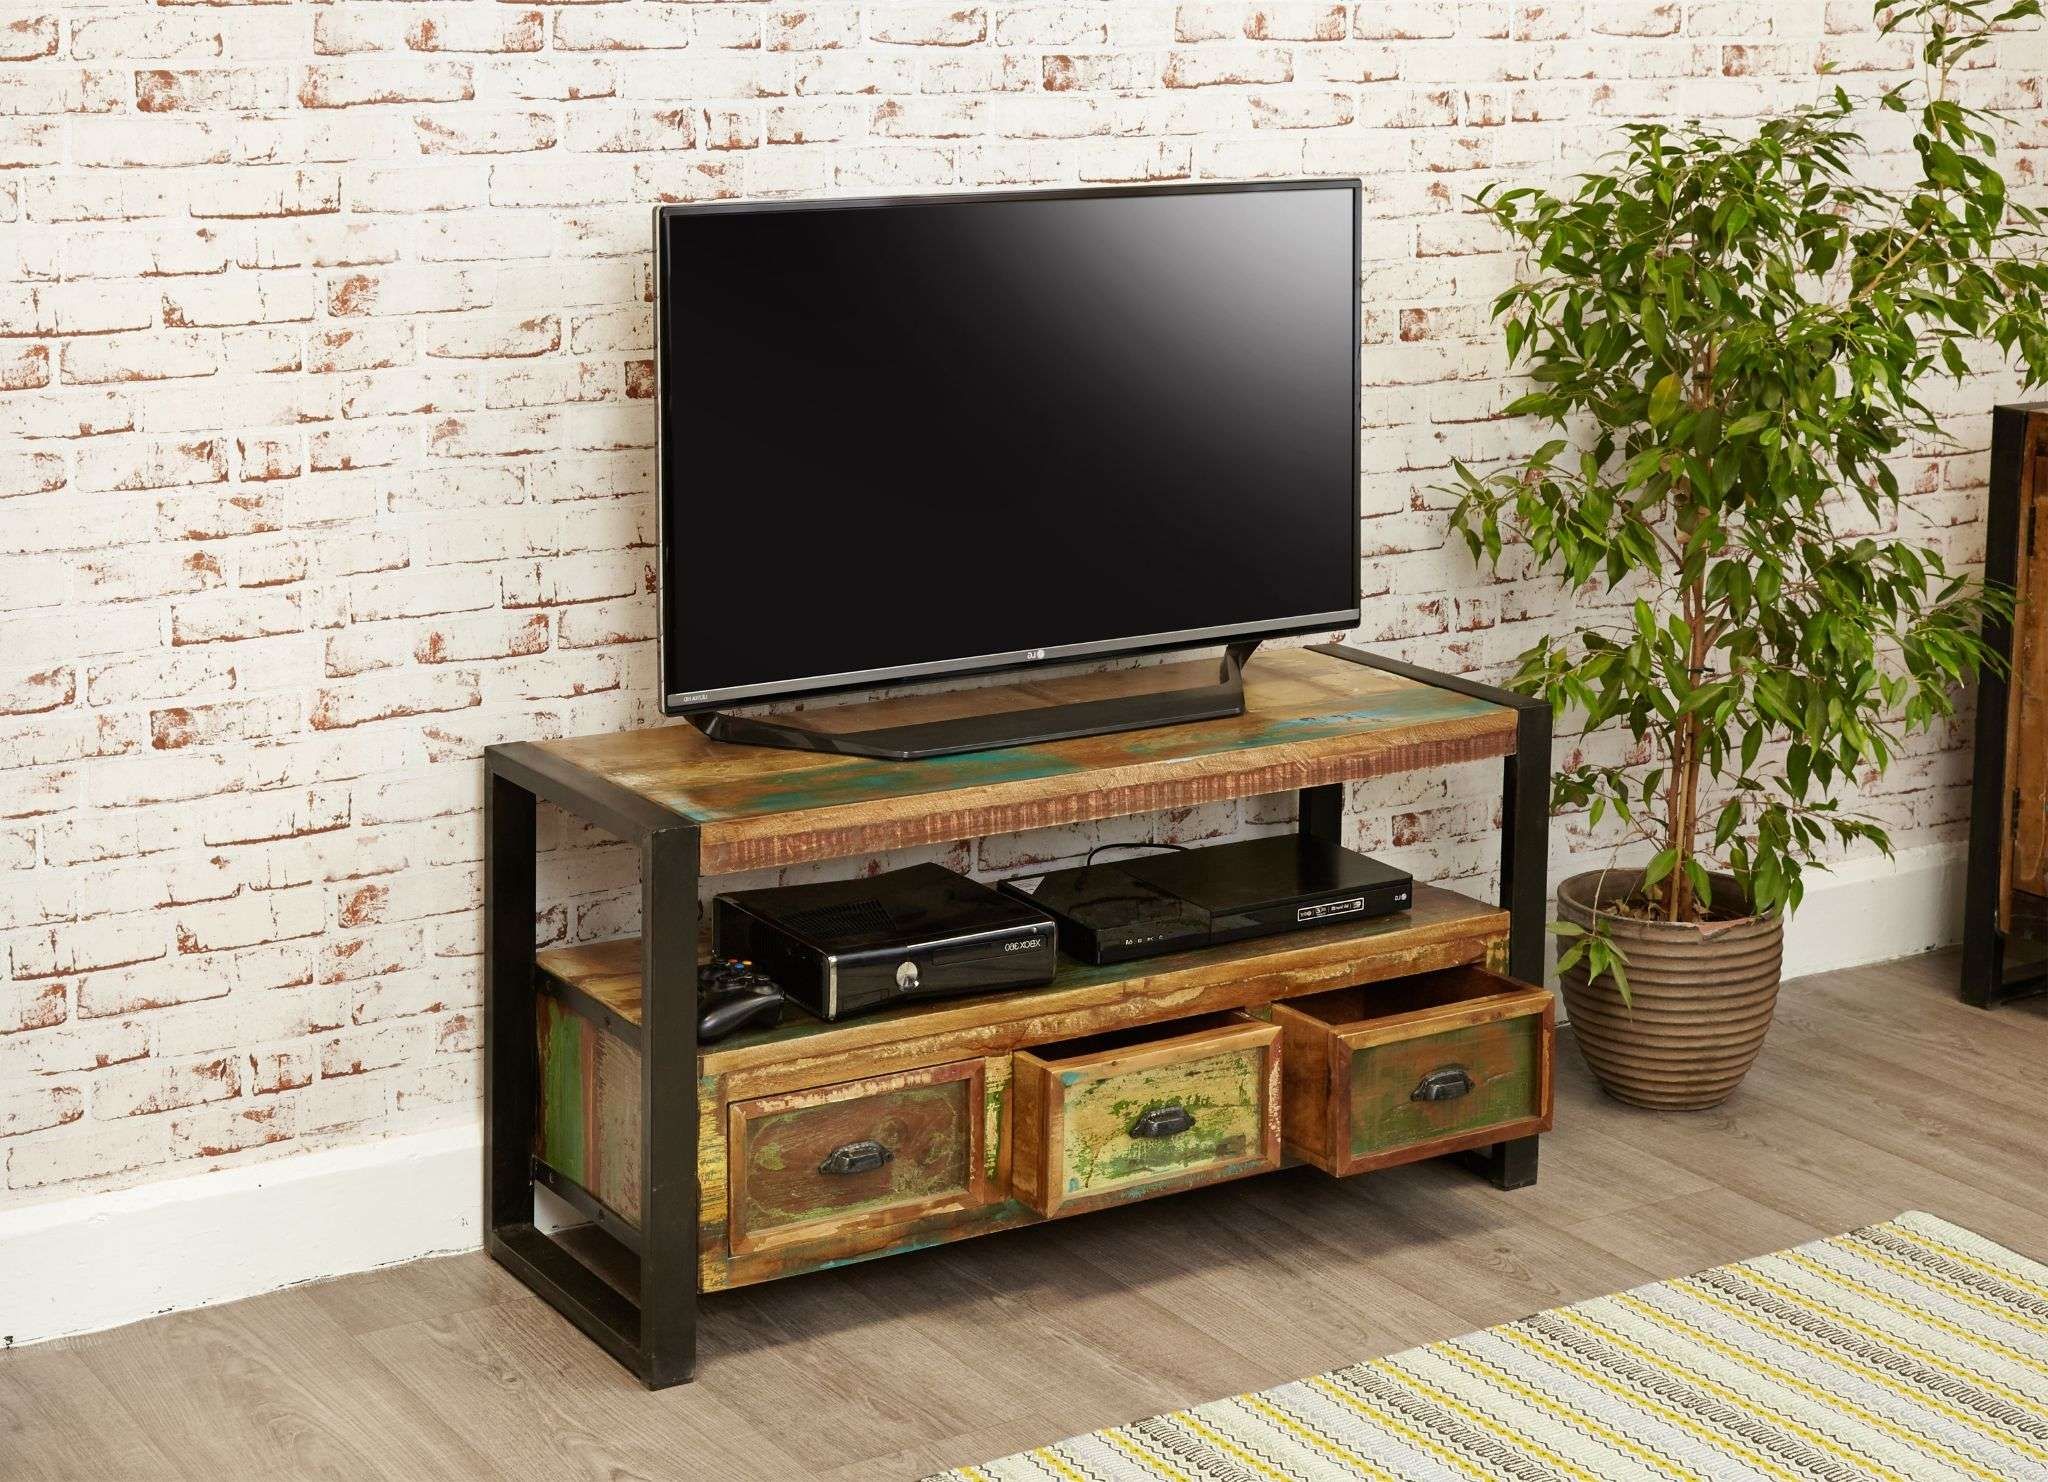 Rustic Industrial Tv Unit | See More Tv Units At Big Blu Inside Industrial Tv Cabinets (Gallery 17 of 20)